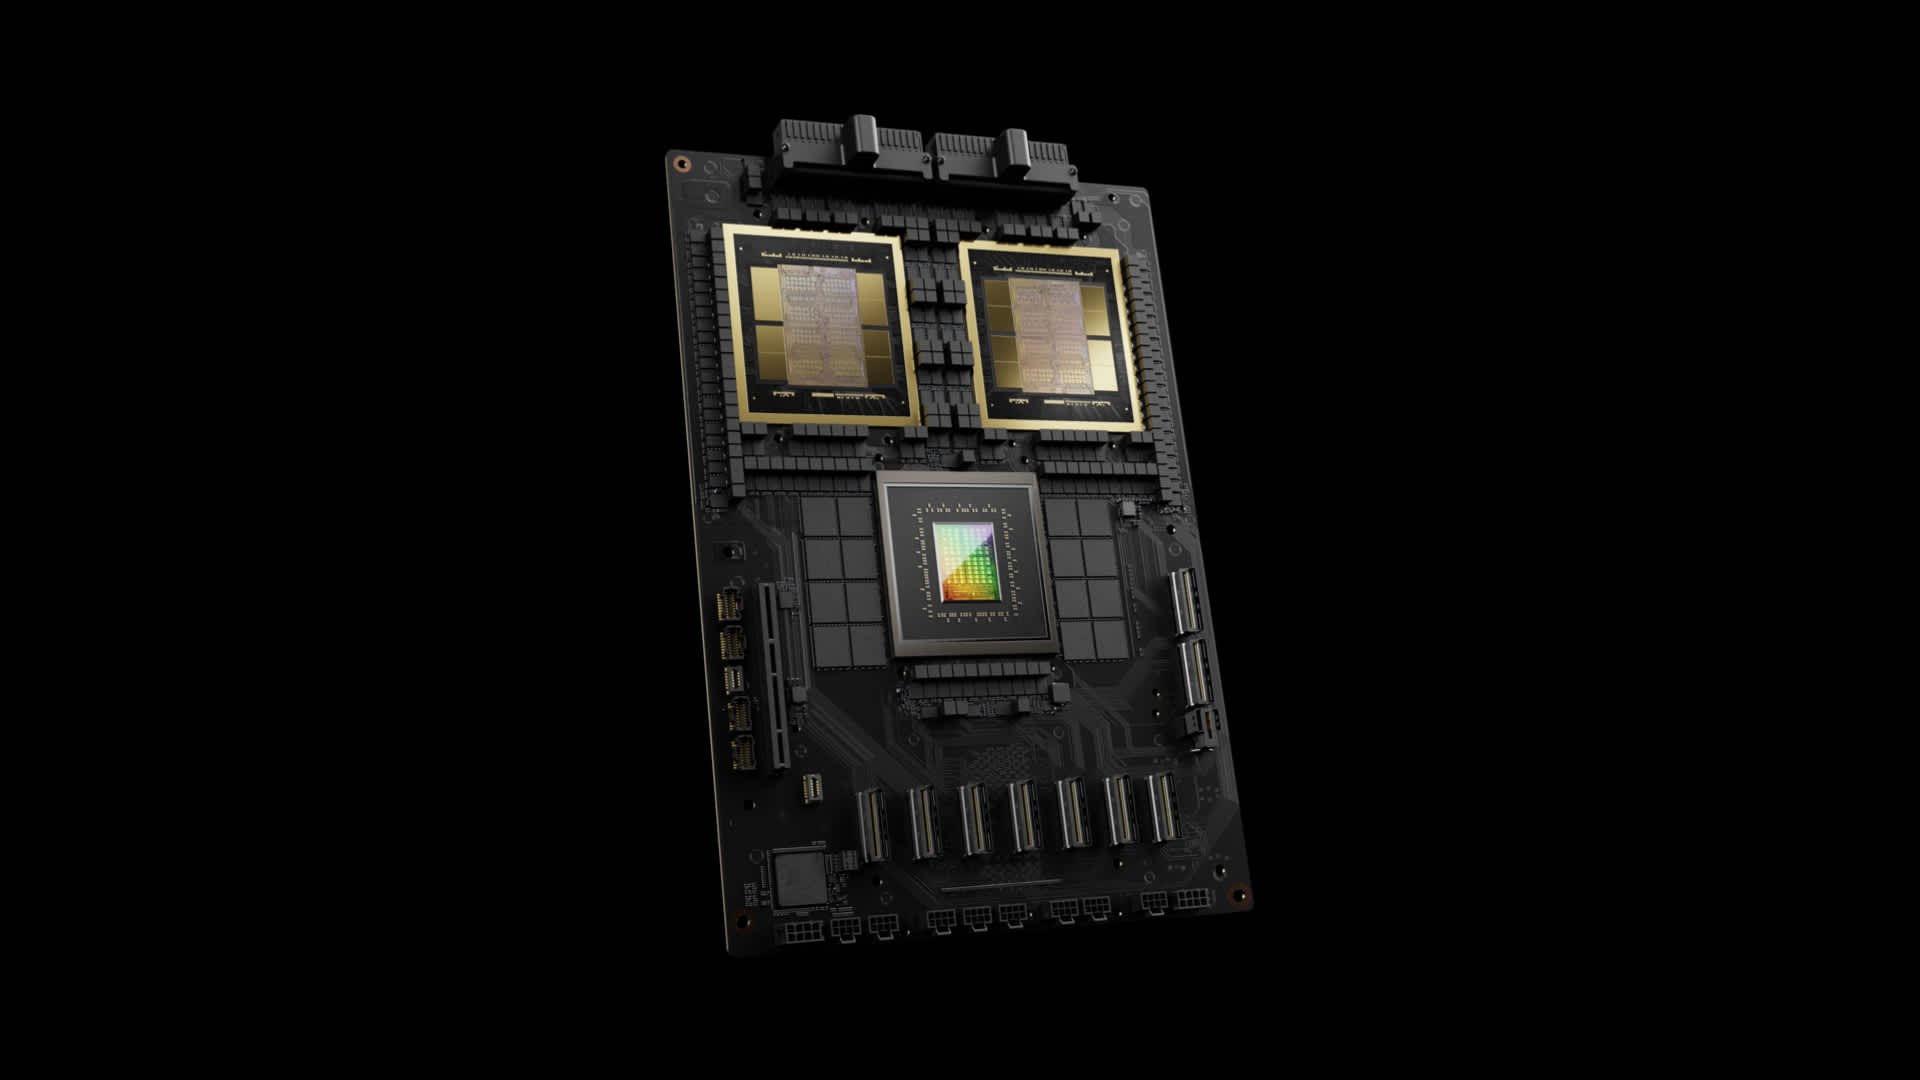 Nvidia's GB200 Grace Blackwell Superchip, with two B200 graphics processors and one Arm-based central processor.